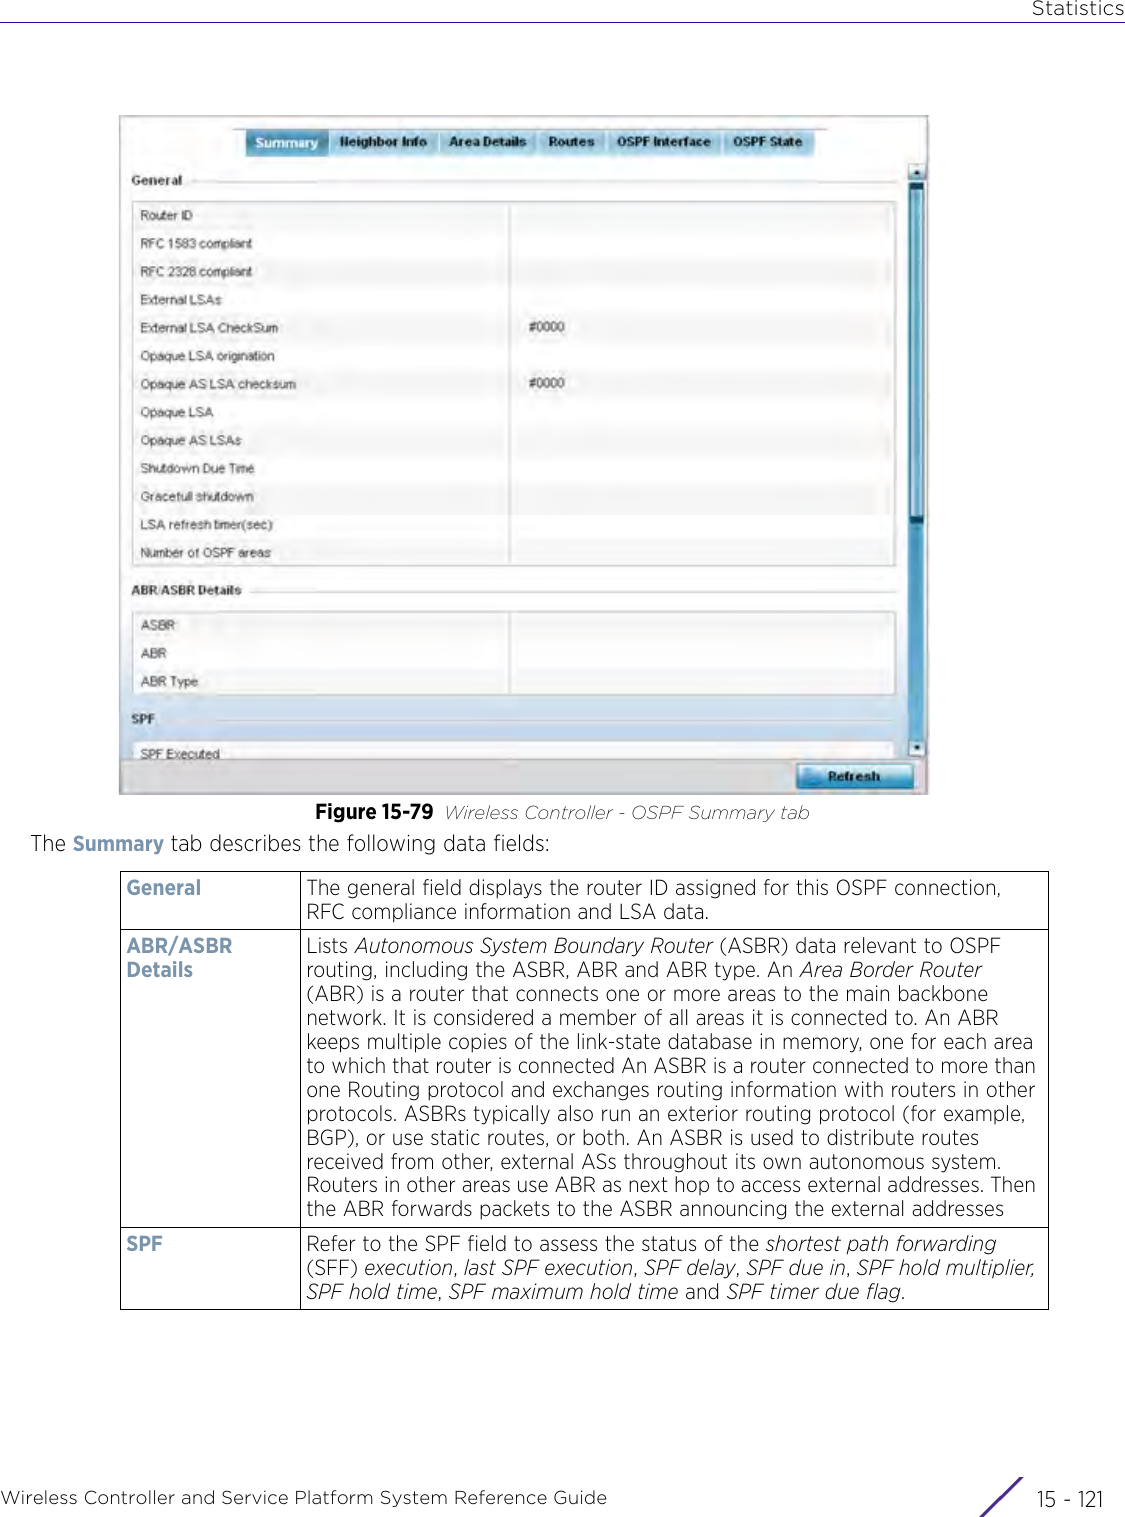 StatisticsWireless Controller and Service Platform System Reference Guide 15 - 121Figure 15-79 Wireless Controller - OSPF Summary tabThe Summary tab describes the following data fields:General The general field displays the router ID assigned for this OSPF connection, RFC compliance information and LSA data. ABR/ASBR DetailsLists Autonomous System Boundary Router (ASBR) data relevant to OSPF routing, including the ASBR, ABR and ABR type. An Area Border Router (ABR) is a router that connects one or more areas to the main backbone network. It is considered a member of all areas it is connected to. An ABR keeps multiple copies of the link-state database in memory, one for each area to which that router is connected An ASBR is a router connected to more than one Routing protocol and exchanges routing information with routers in other protocols. ASBRs typically also run an exterior routing protocol (for example, BGP), or use static routes, or both. An ASBR is used to distribute routes received from other, external ASs throughout its own autonomous system. Routers in other areas use ABR as next hop to access external addresses. Then the ABR forwards packets to the ASBR announcing the external addressesSPF Refer to the SPF field to assess the status of the shortest path forwarding (SFF) execution, last SPF execution, SPF delay, SPF due in, SPF hold multiplier, SPF hold time, SPF maximum hold time and SPF timer due flag.